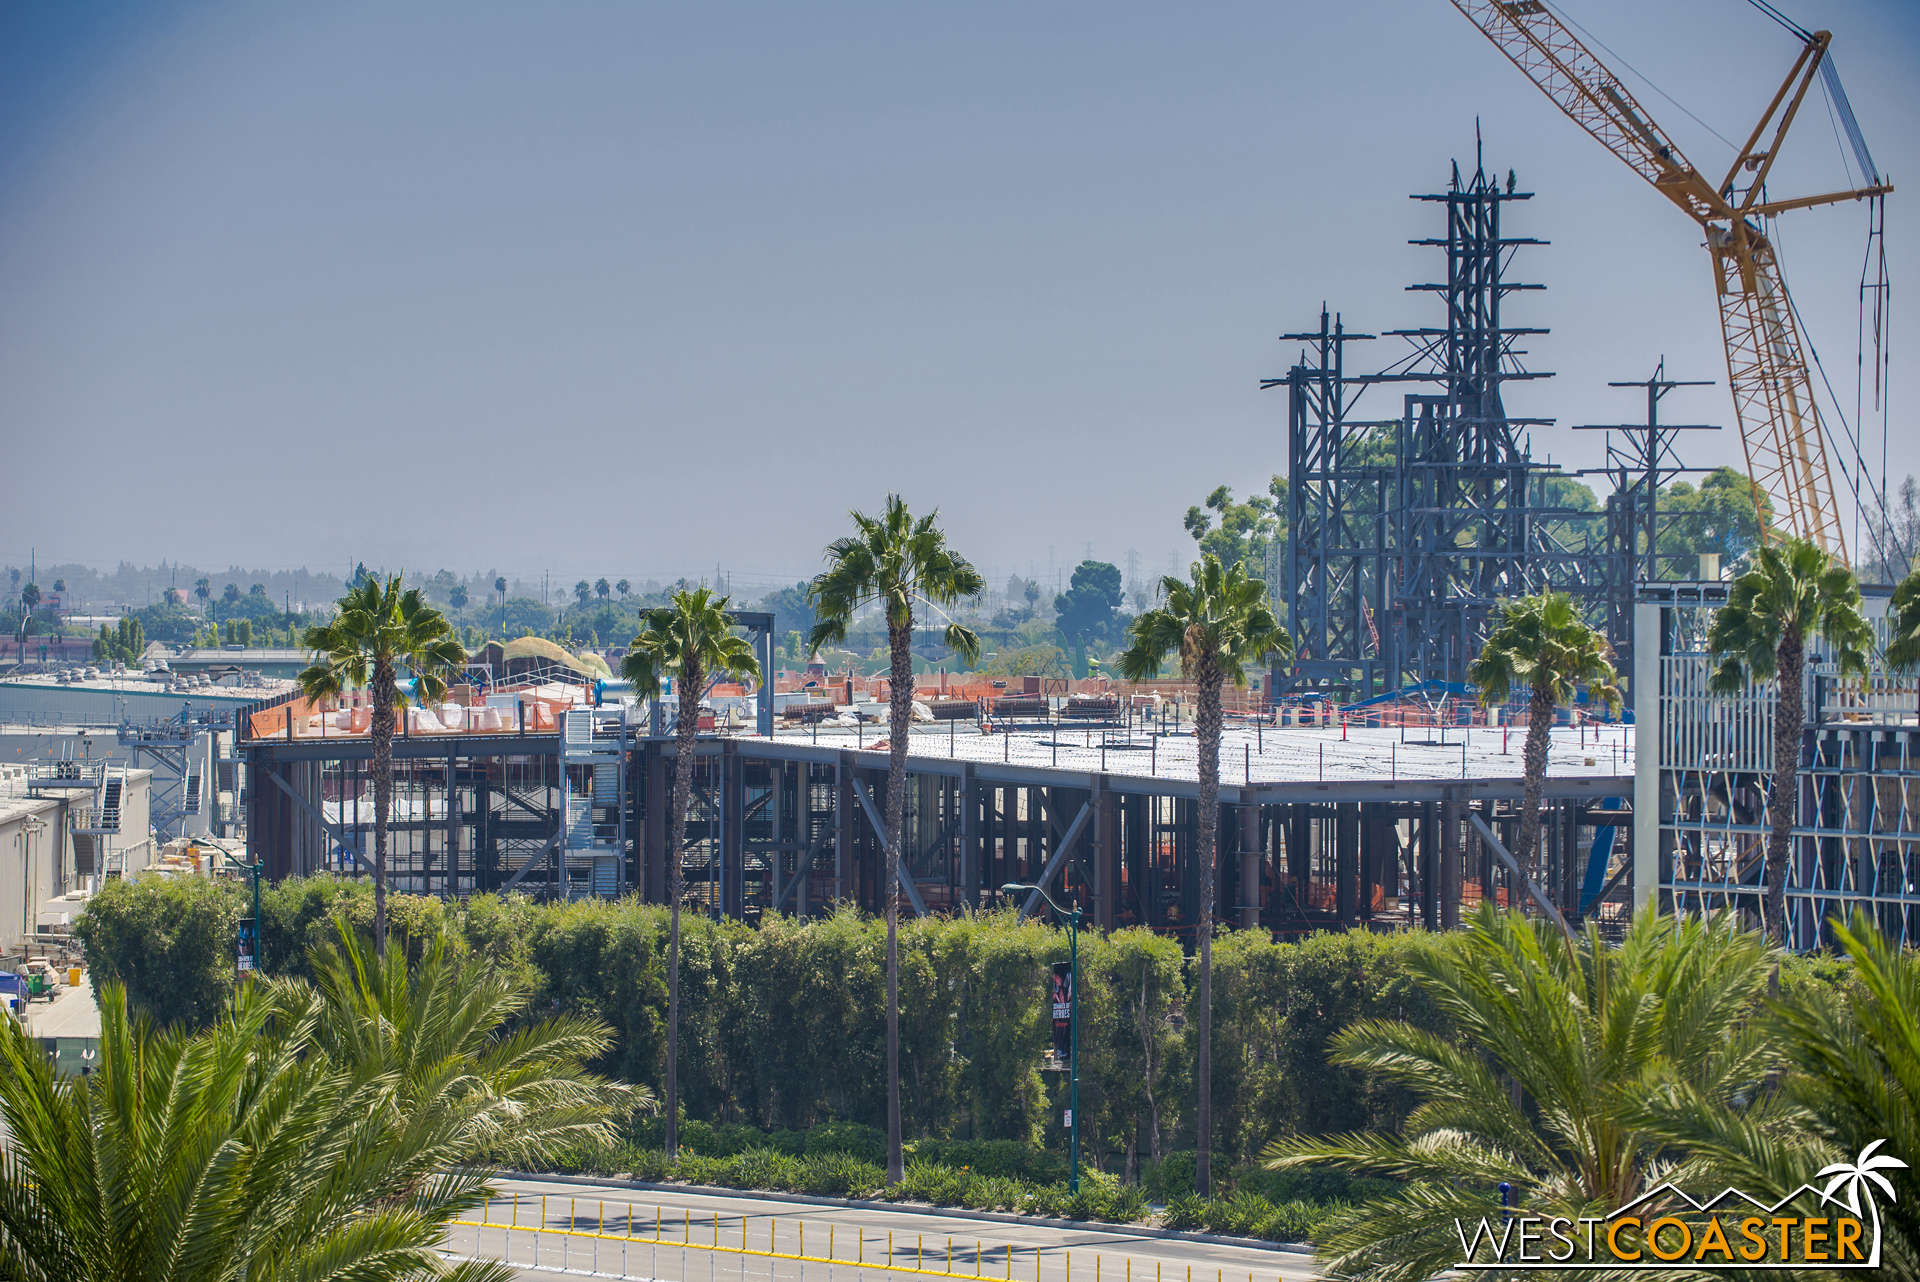  As I mentioned, the big news last week was the topping off of the highest part of the structure in Star Wars: Galaxy's Edge. 